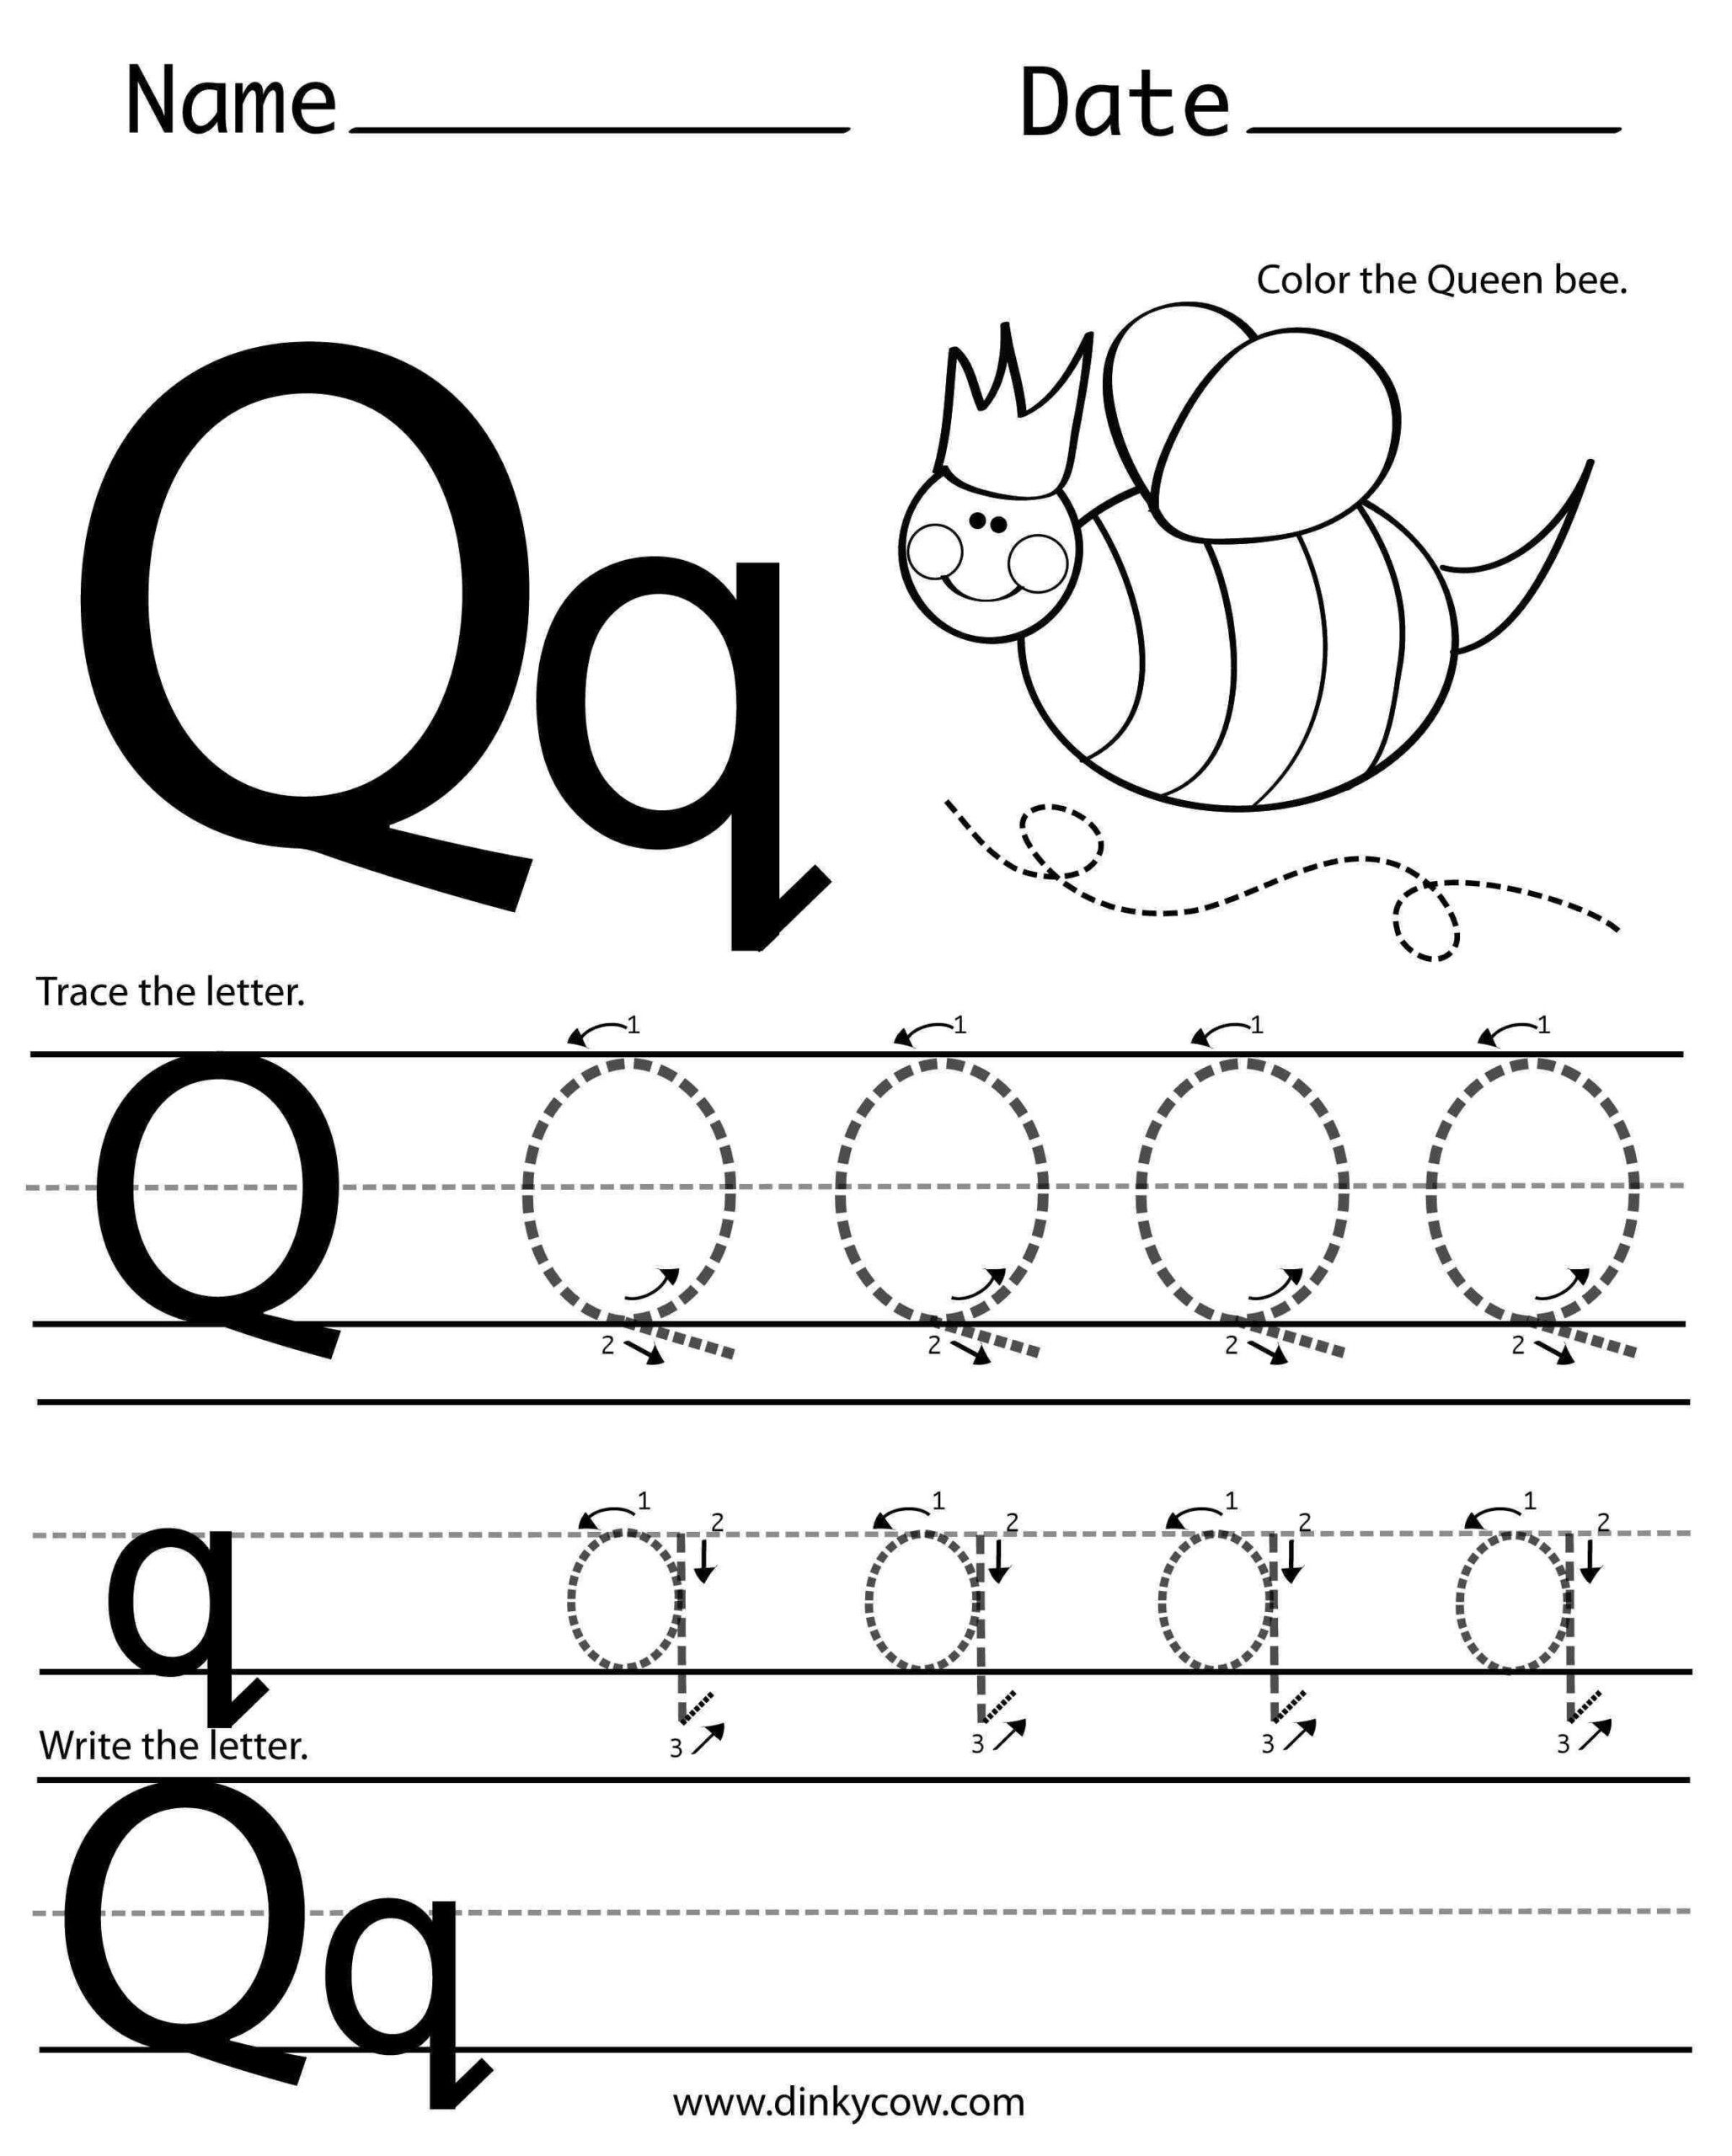 Lovely Good Handwriting Practice | Cursive Writing regarding Tracing Letter Q Worksheets